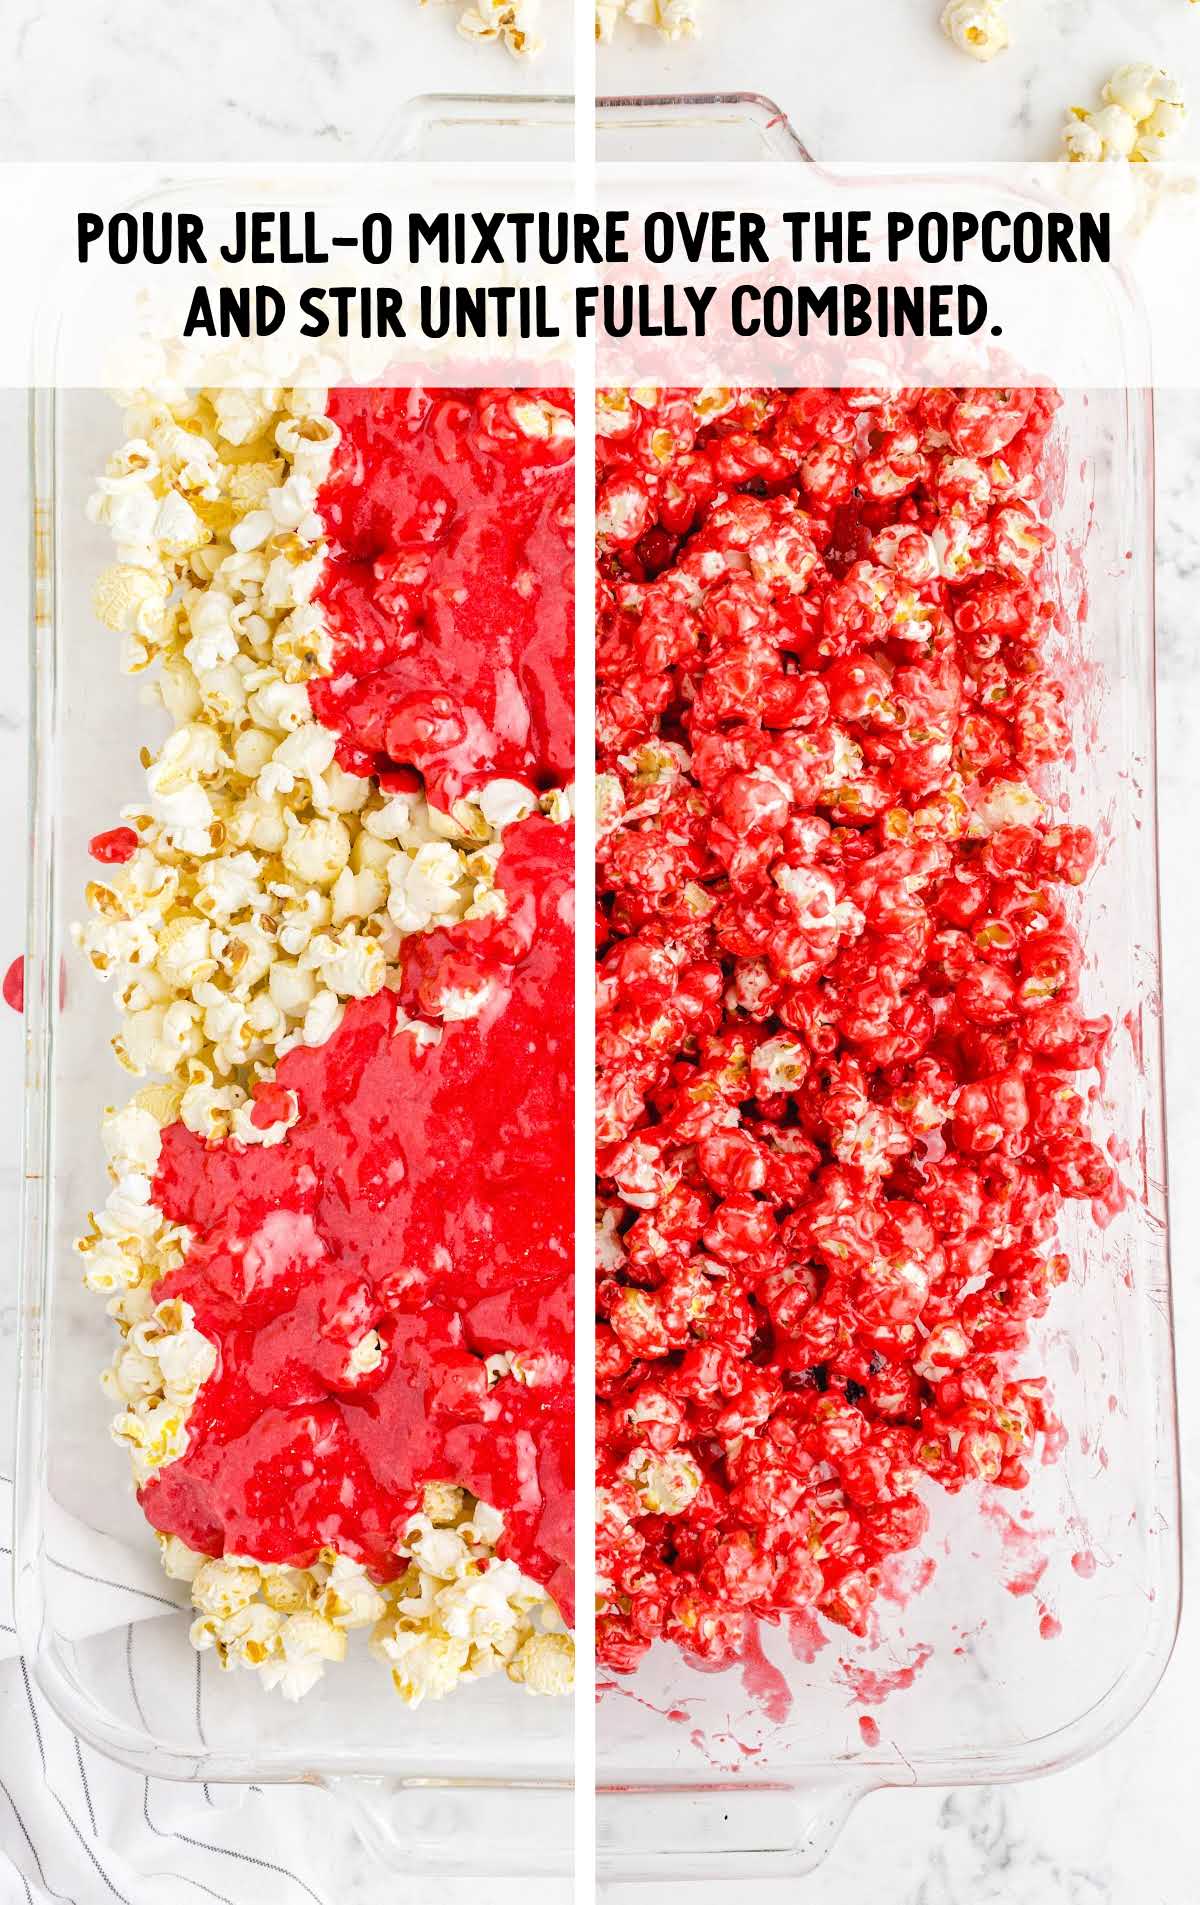 jello mixture being poured over popcorn and combined